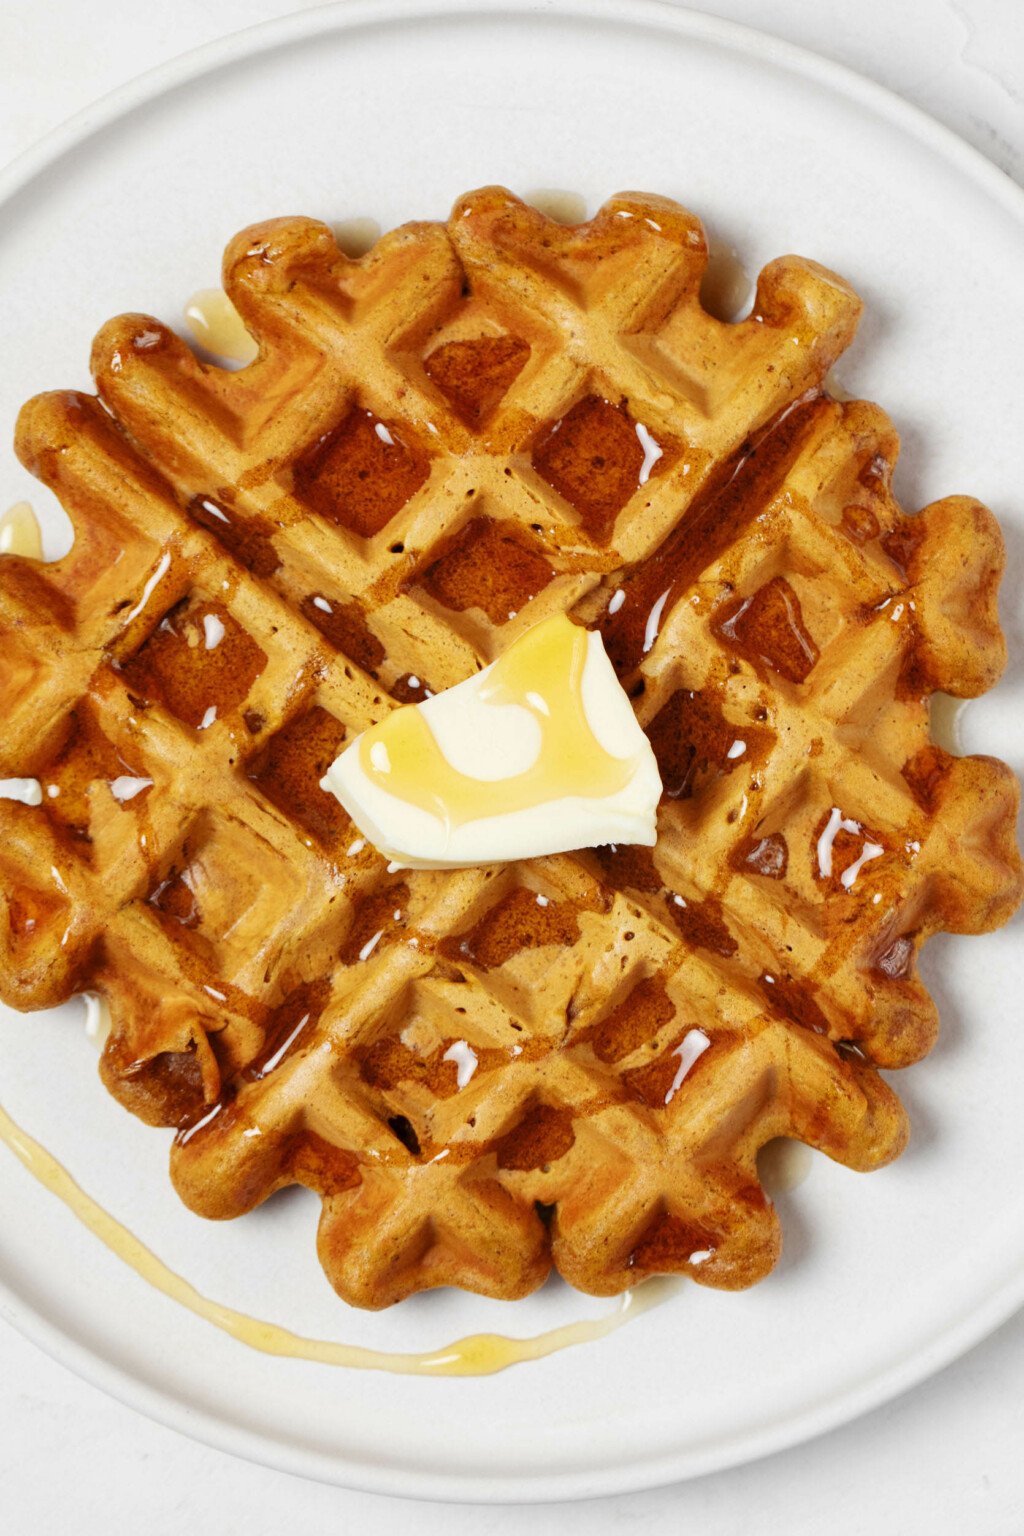 A zoomed-in, overhead image of a deeply golden colored waffle. The waffle is topped with a little pat of butter and some syrup.